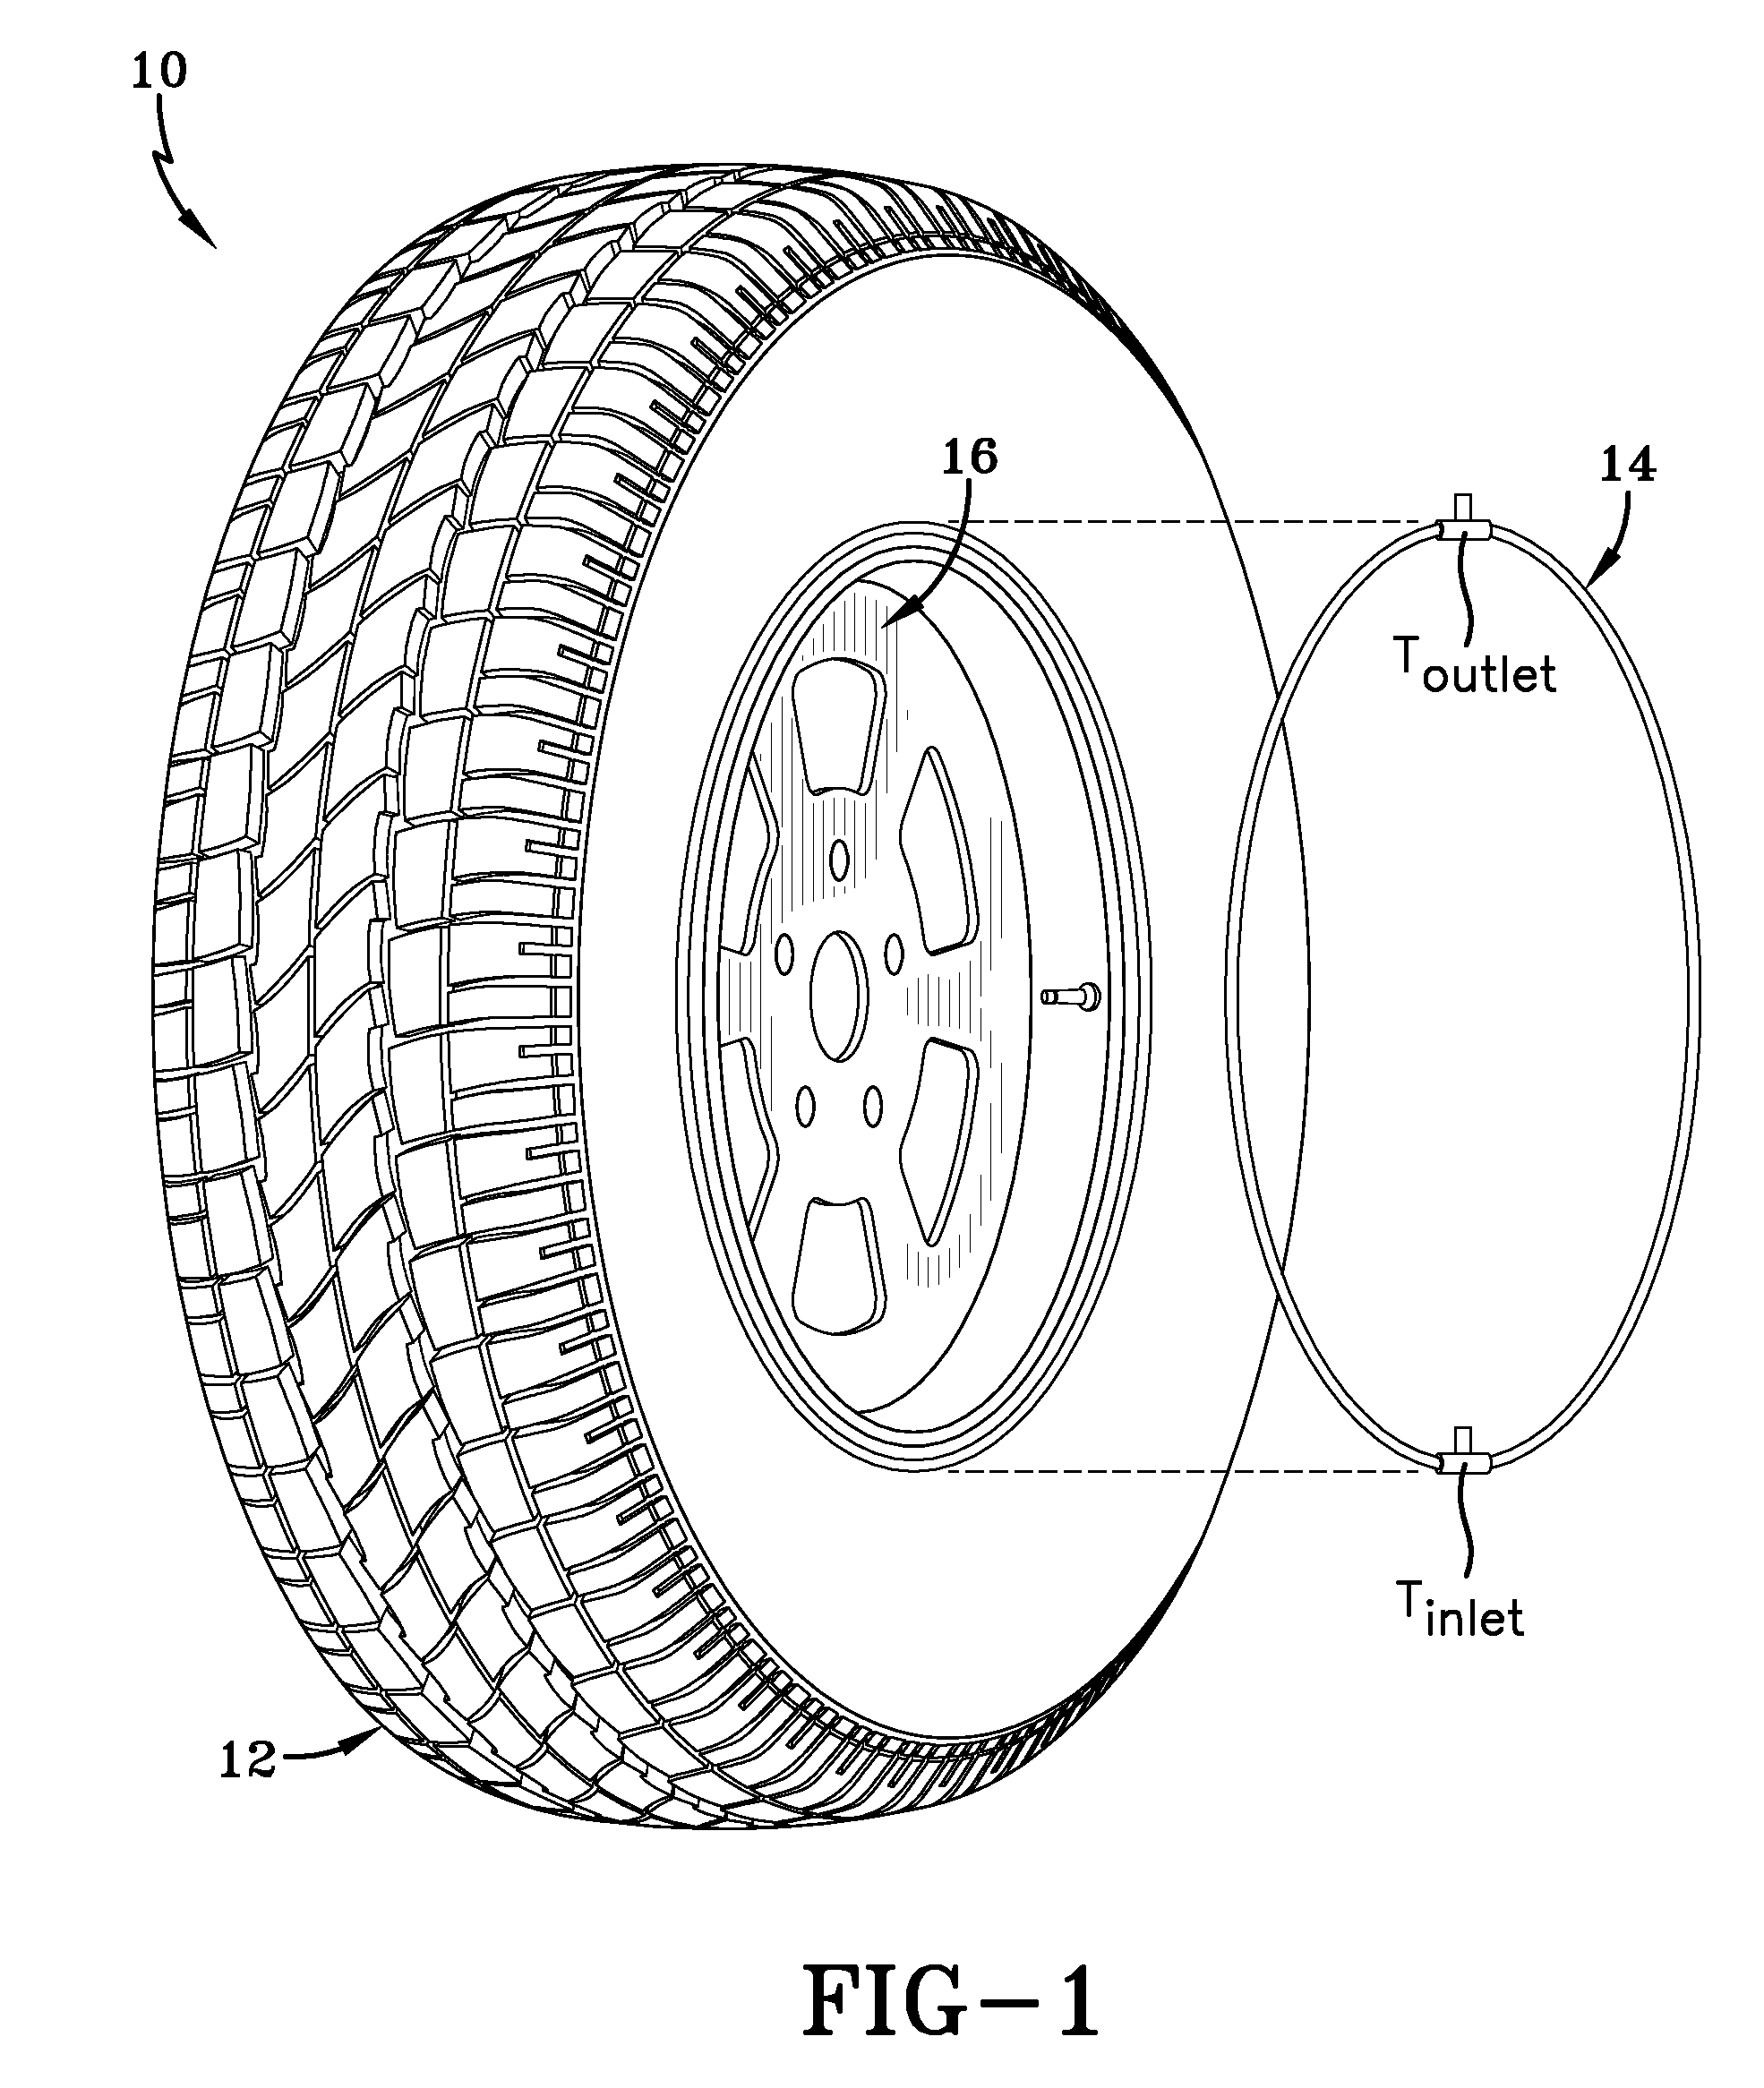 Self-inflating tire